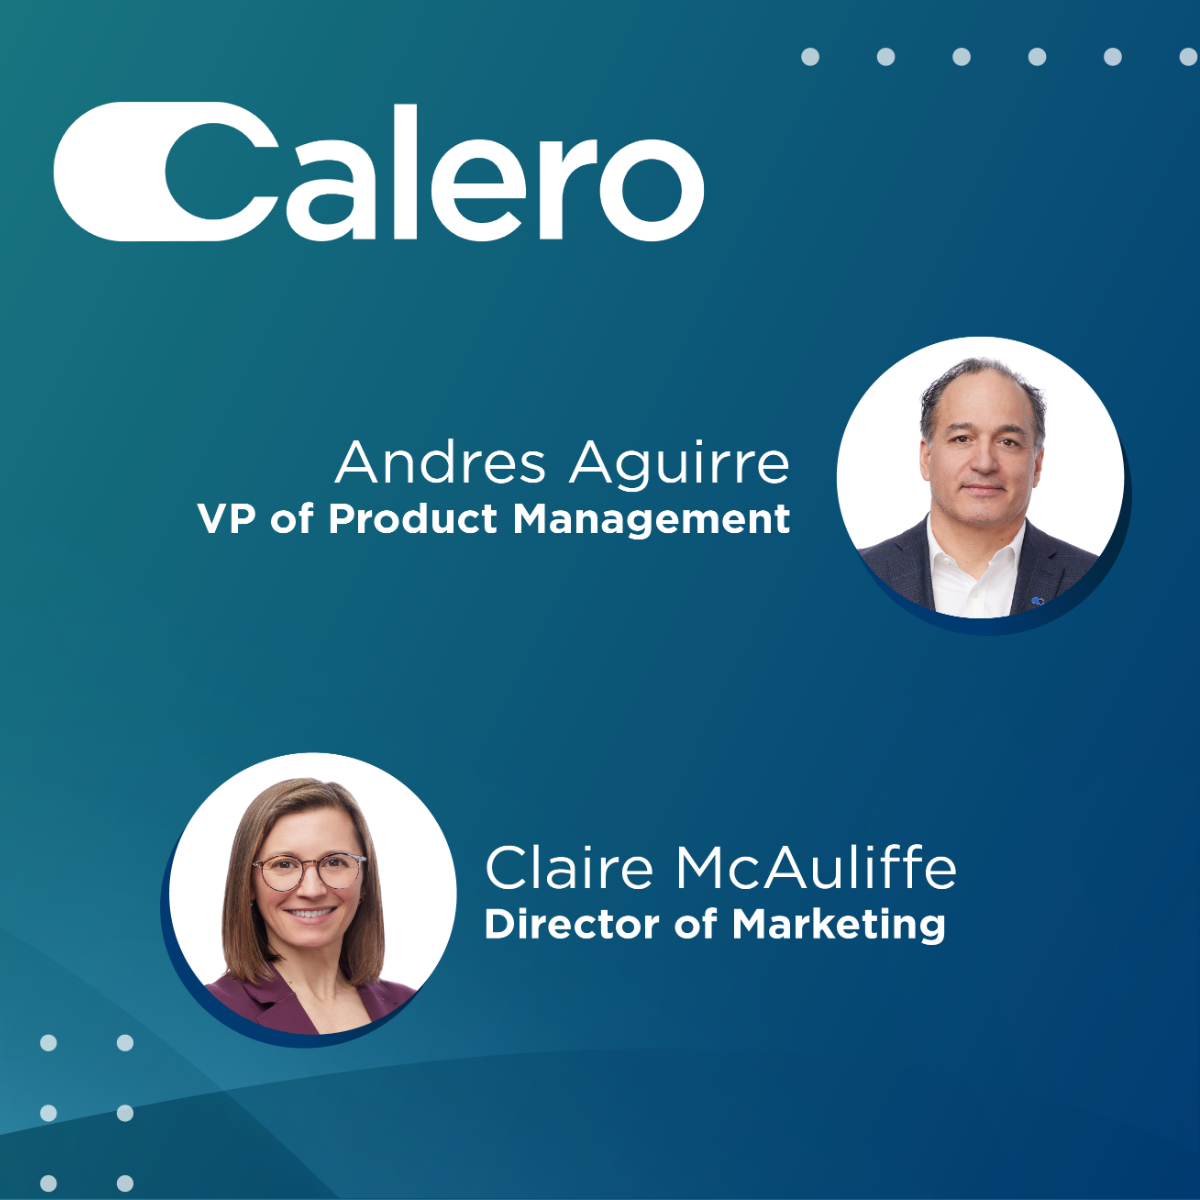 Calero promotes Andres Aguirre and Claire McAuliffe to Executive Team